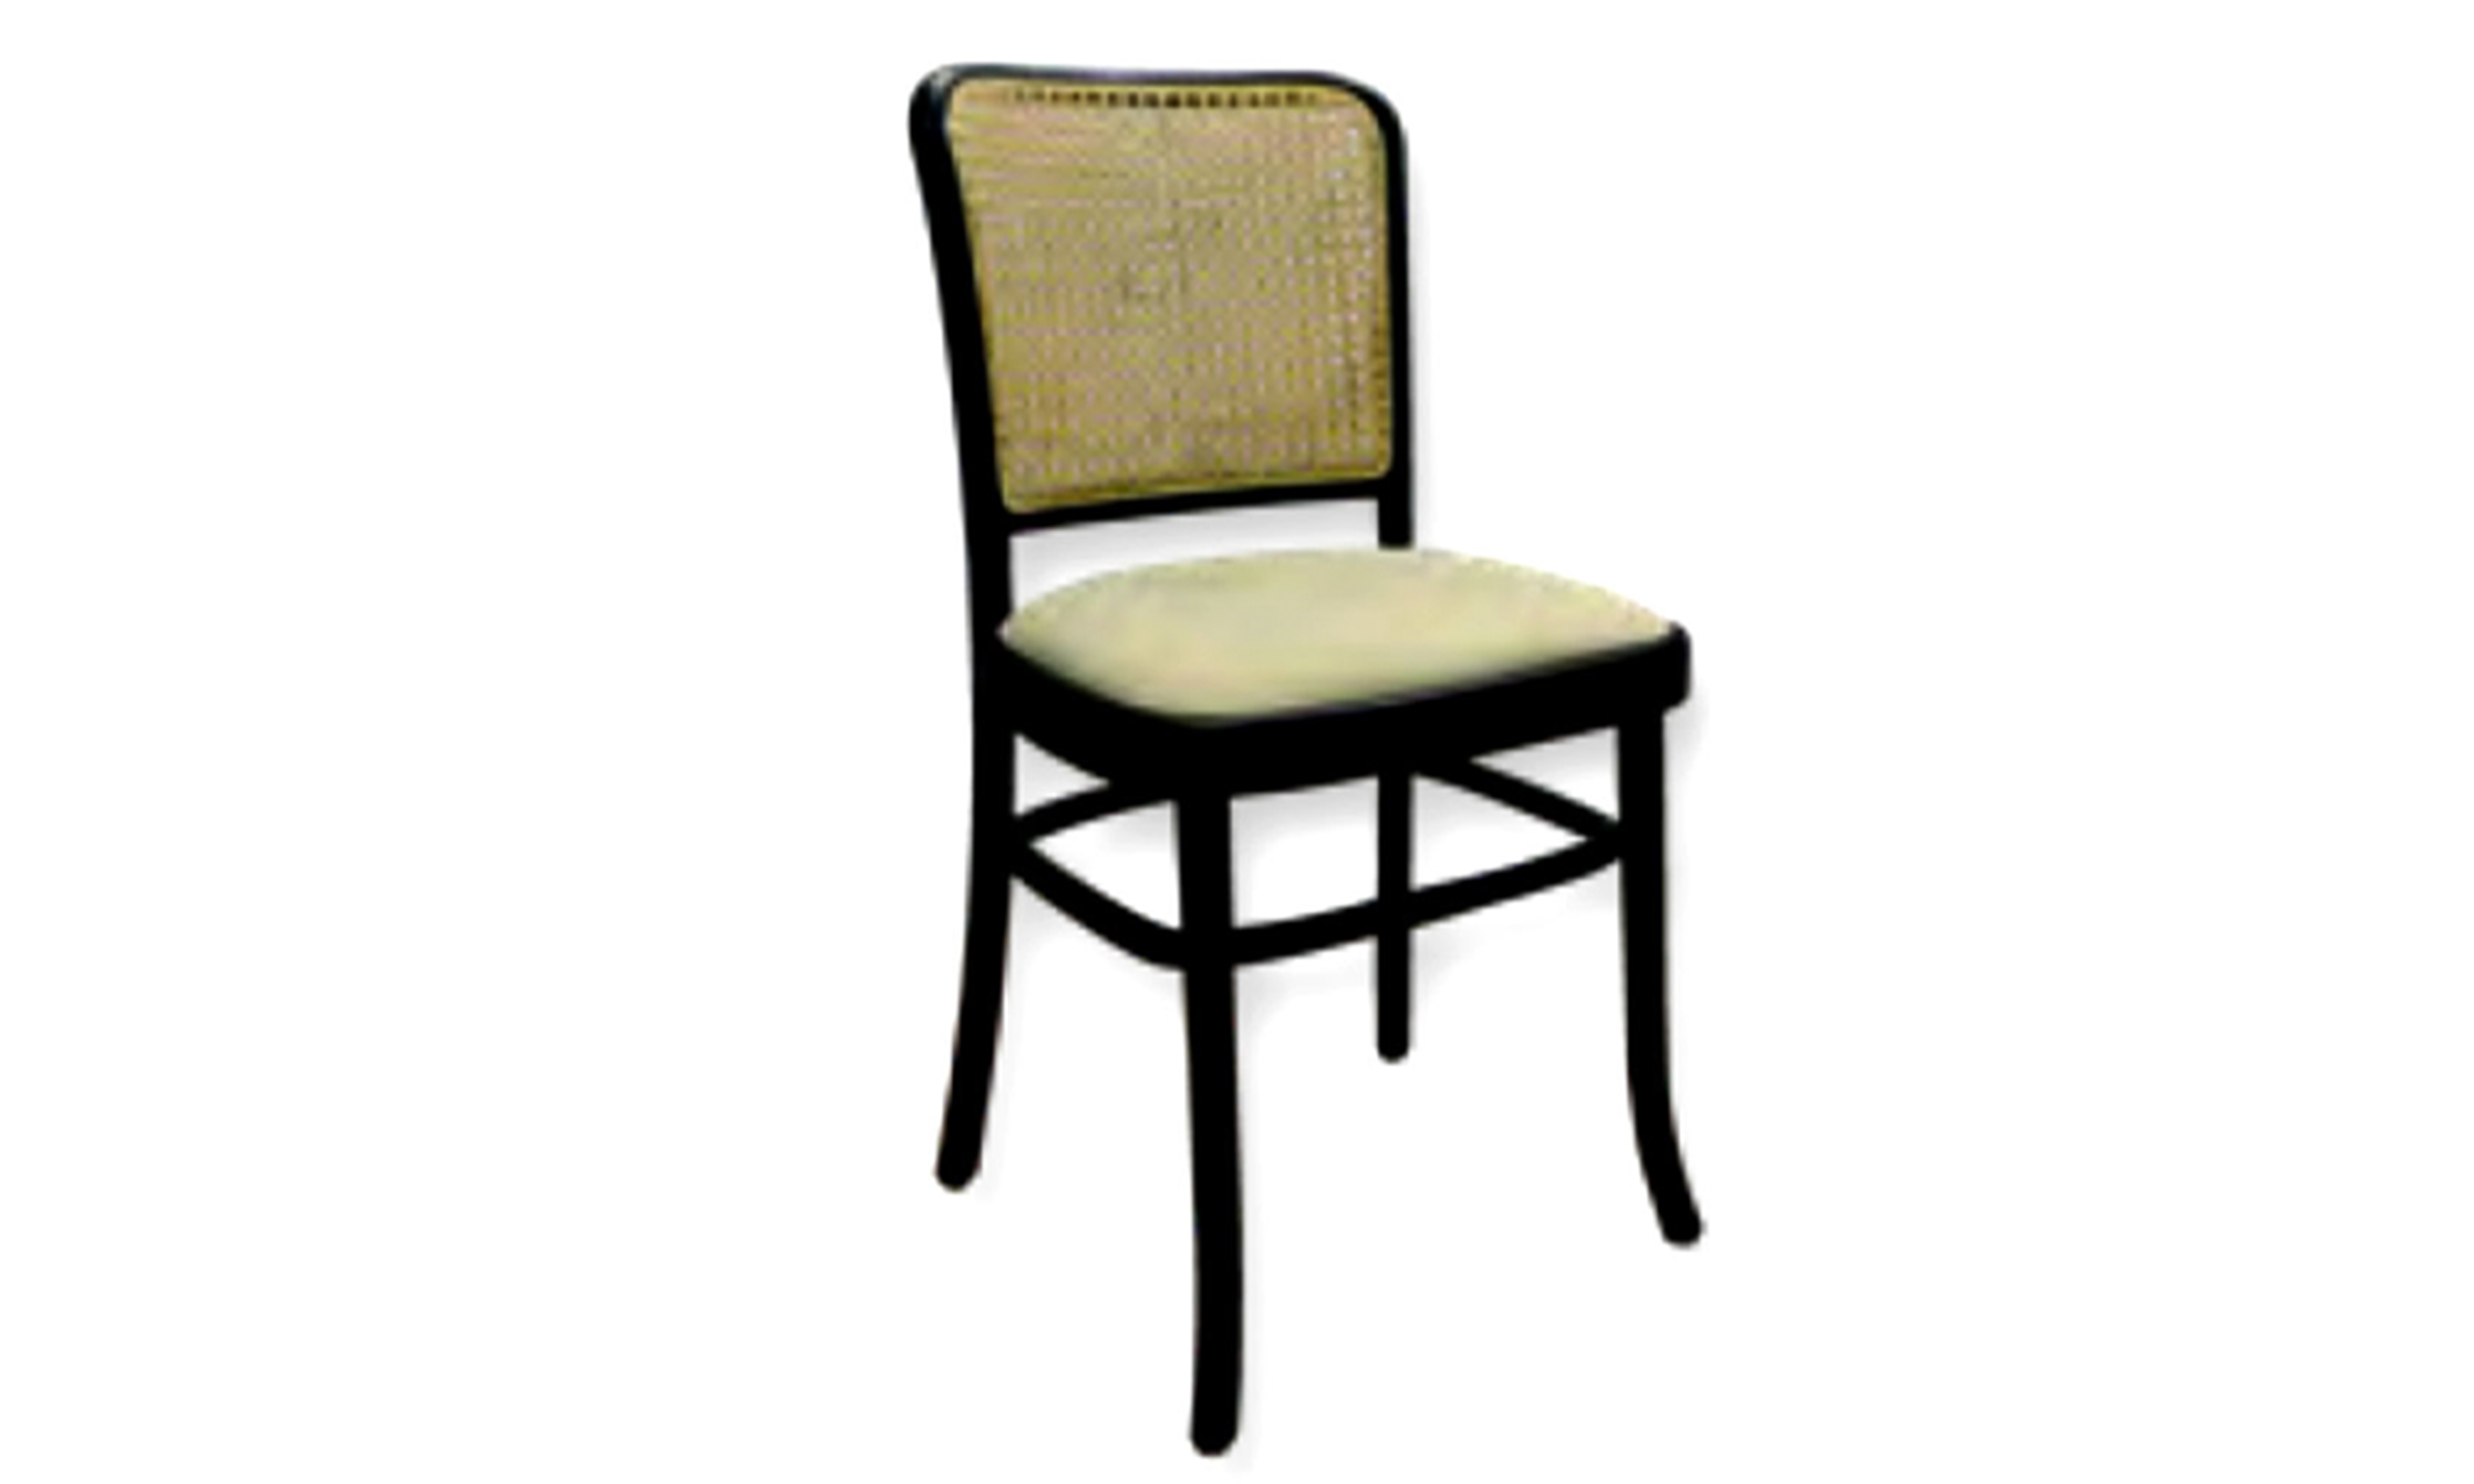 Tekkashop SIPA558BL Contemporary Style Rubberwood Frame Rattan Backrest and Cushion Seating Restaurant Dining Chair